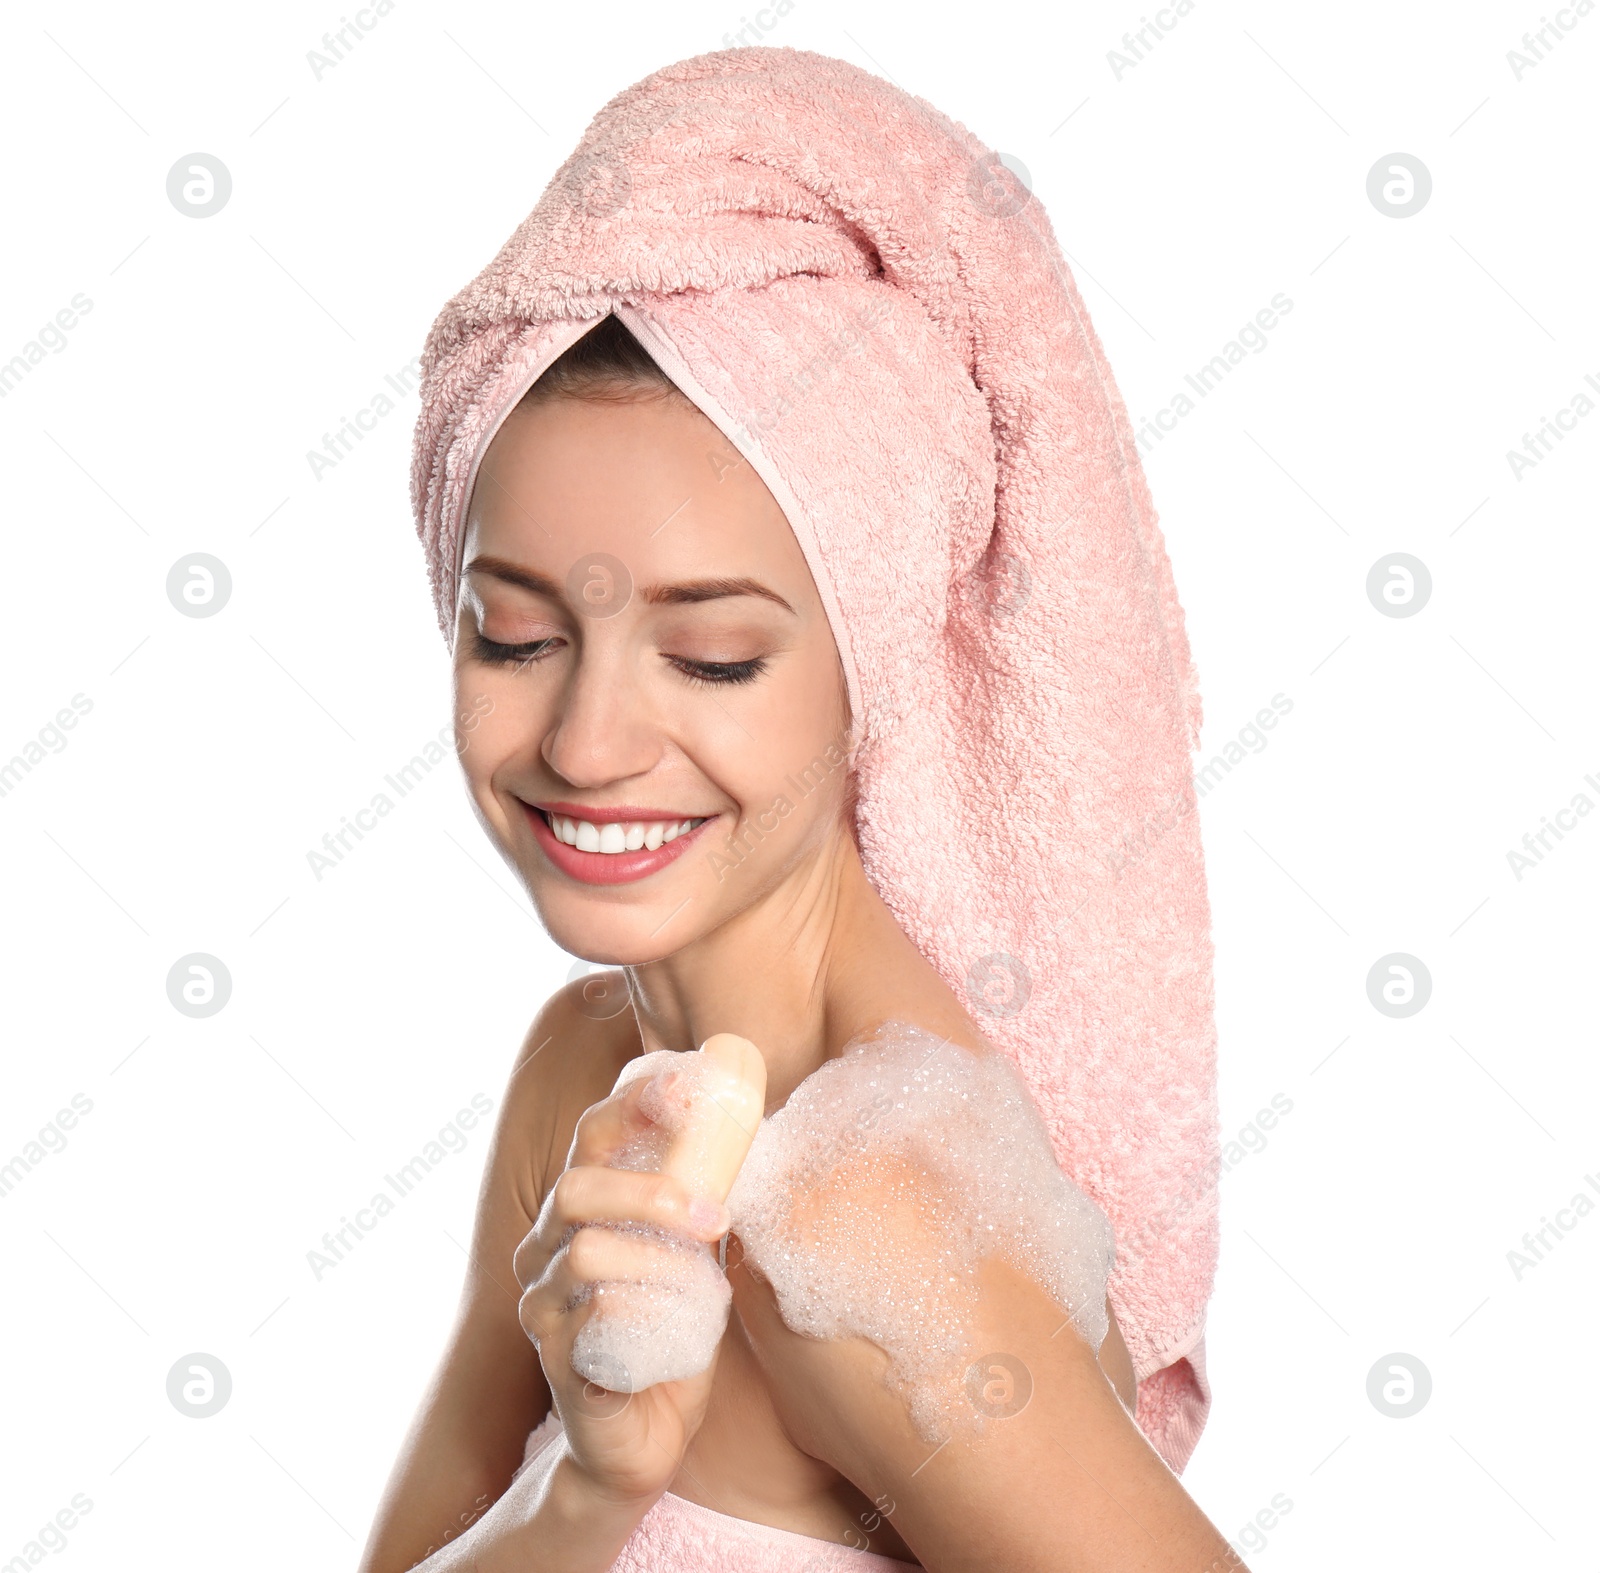 Image of Young woman washing body with soap bar on white background